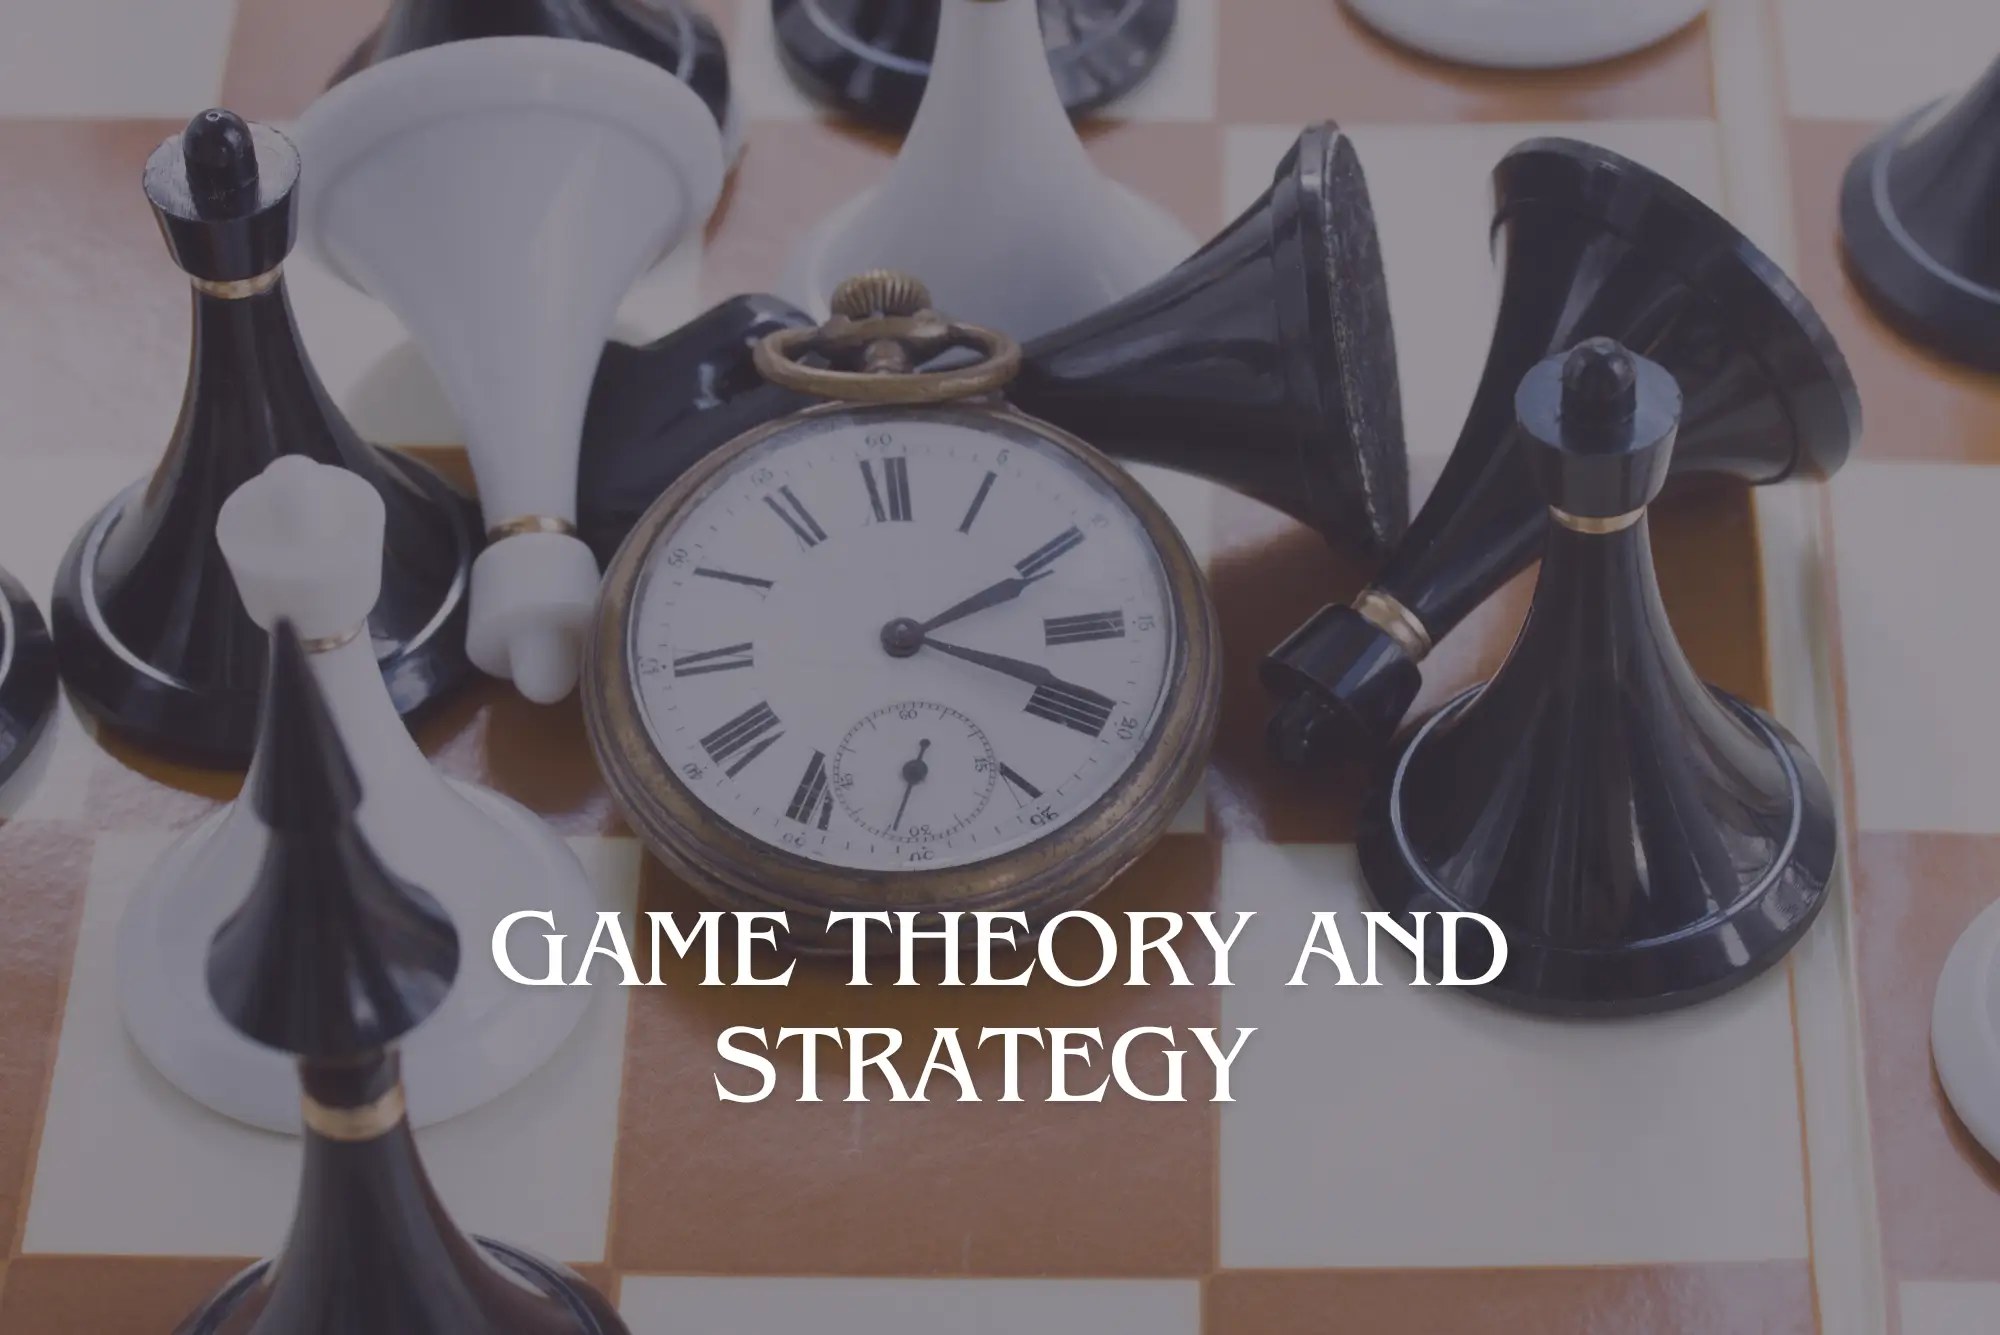 Game Theory and Strategy